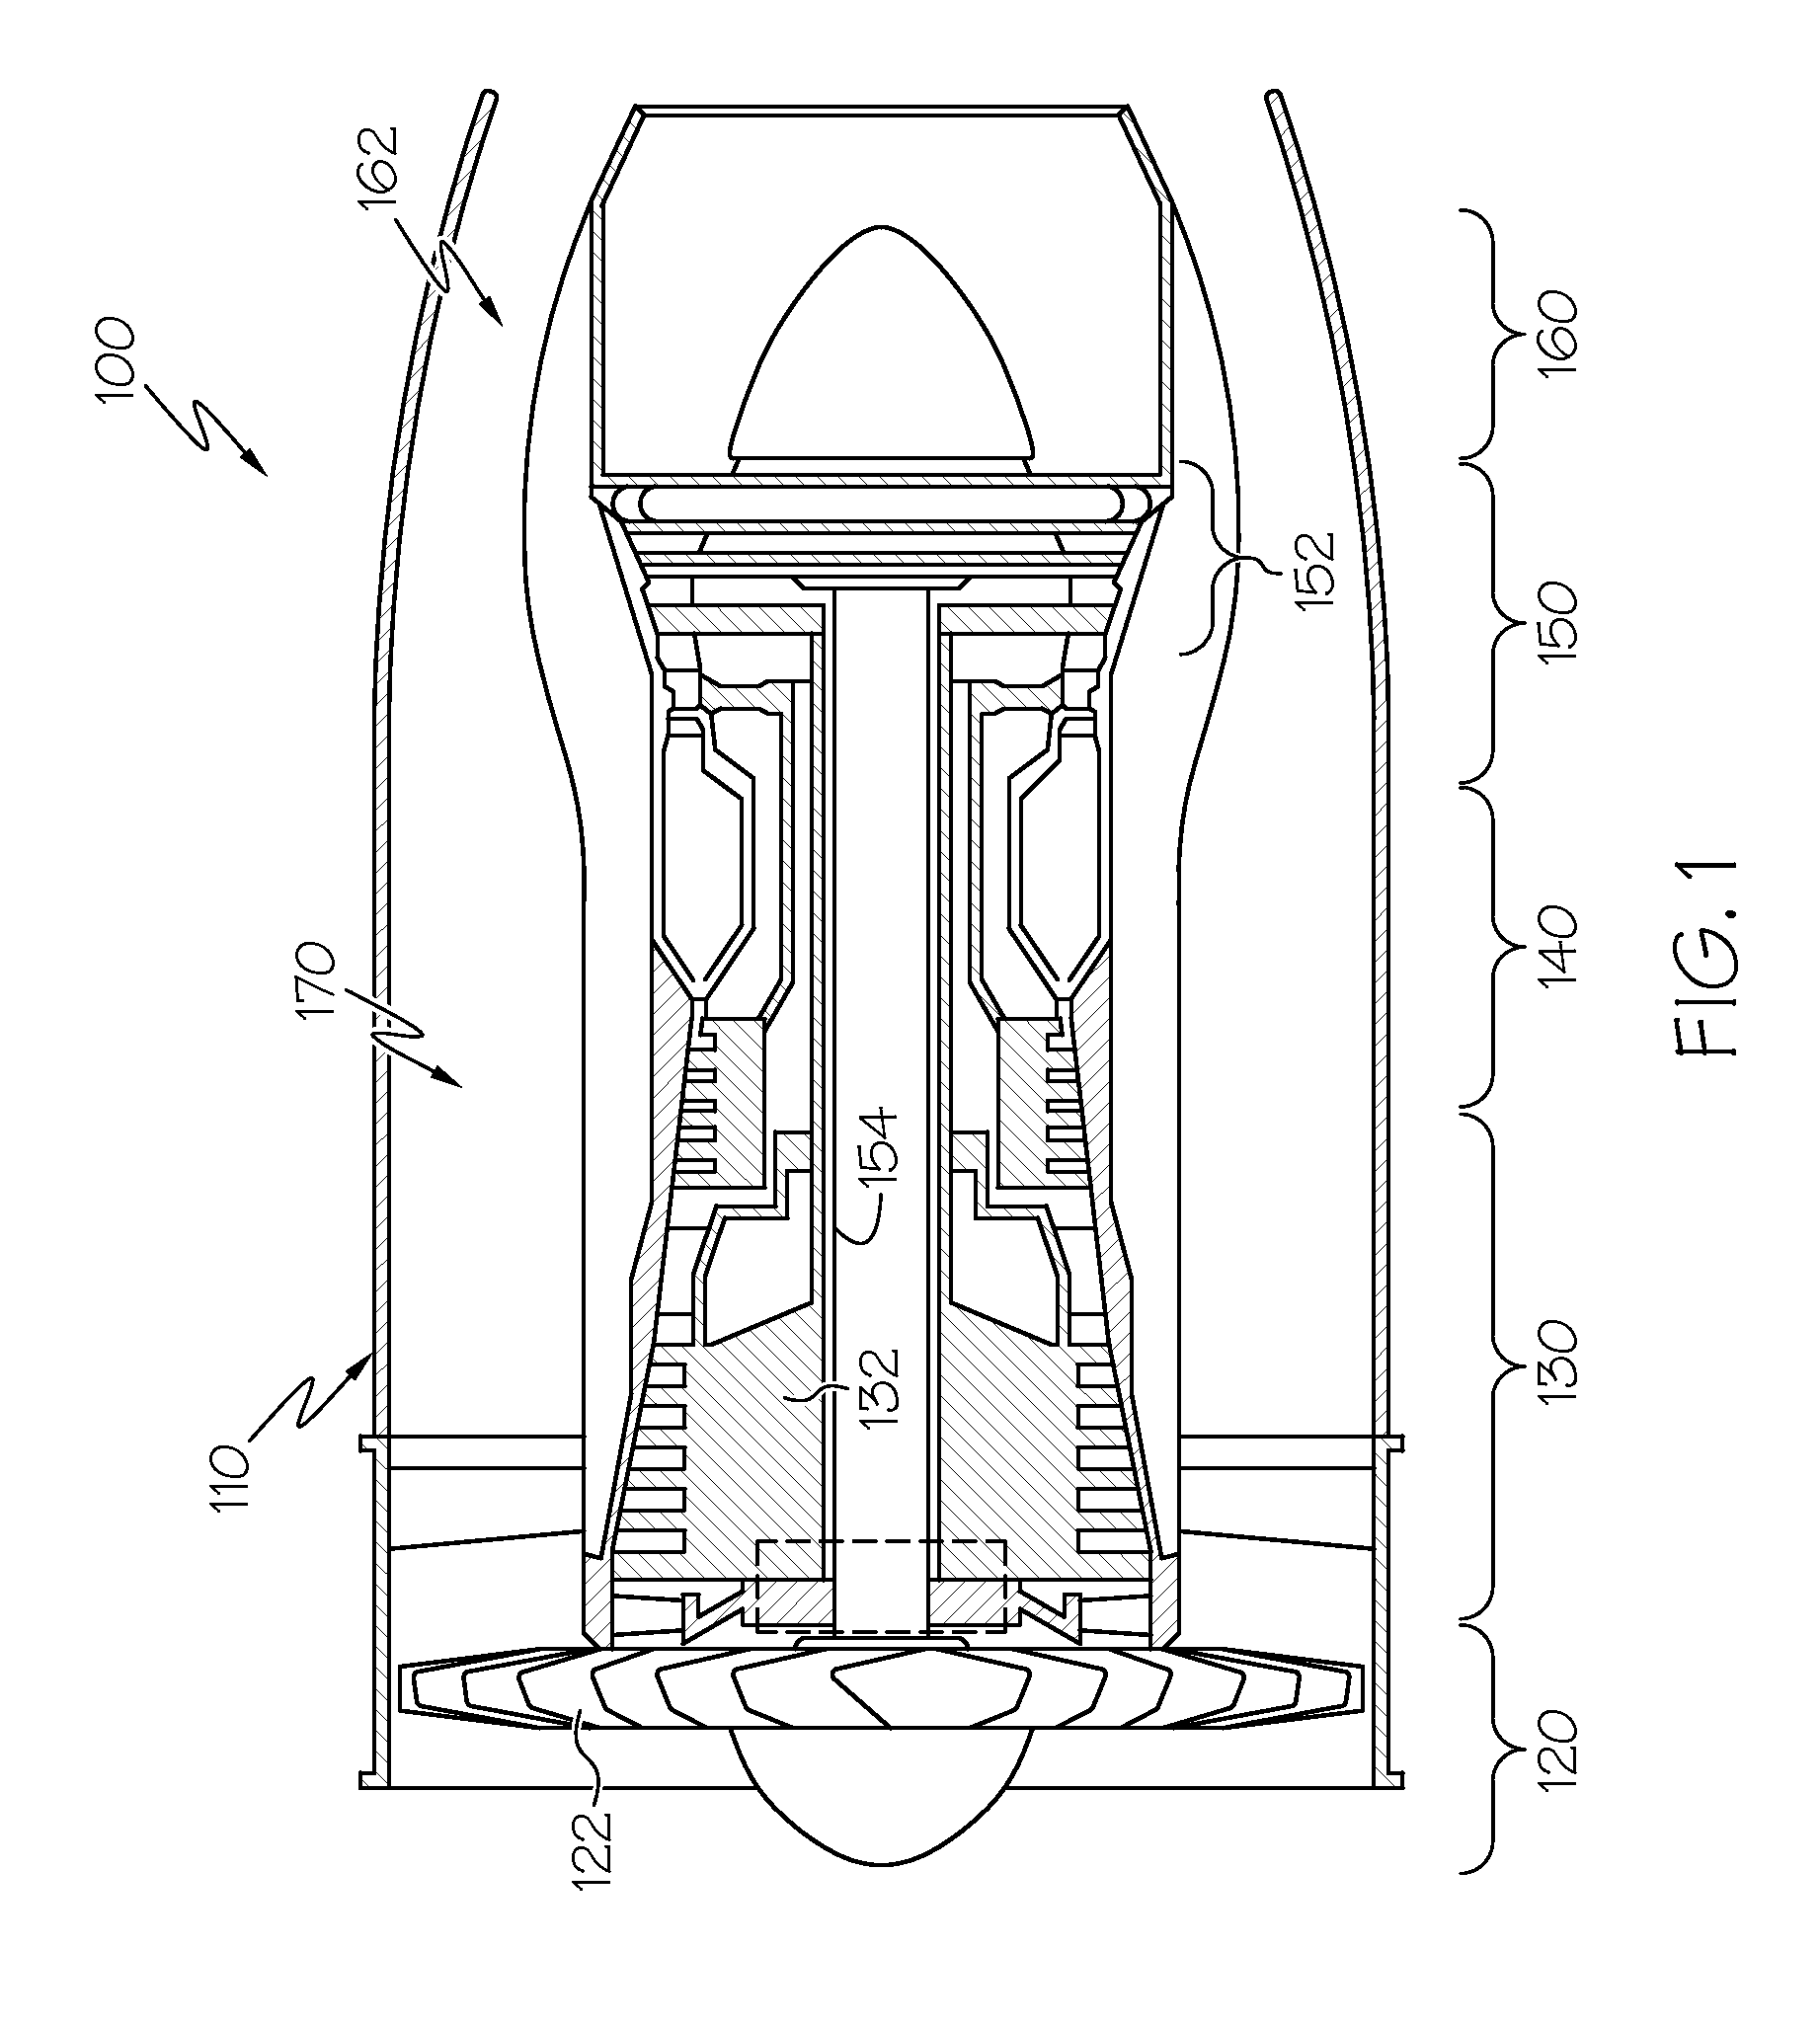 Combustors with complex shaped effusion holes